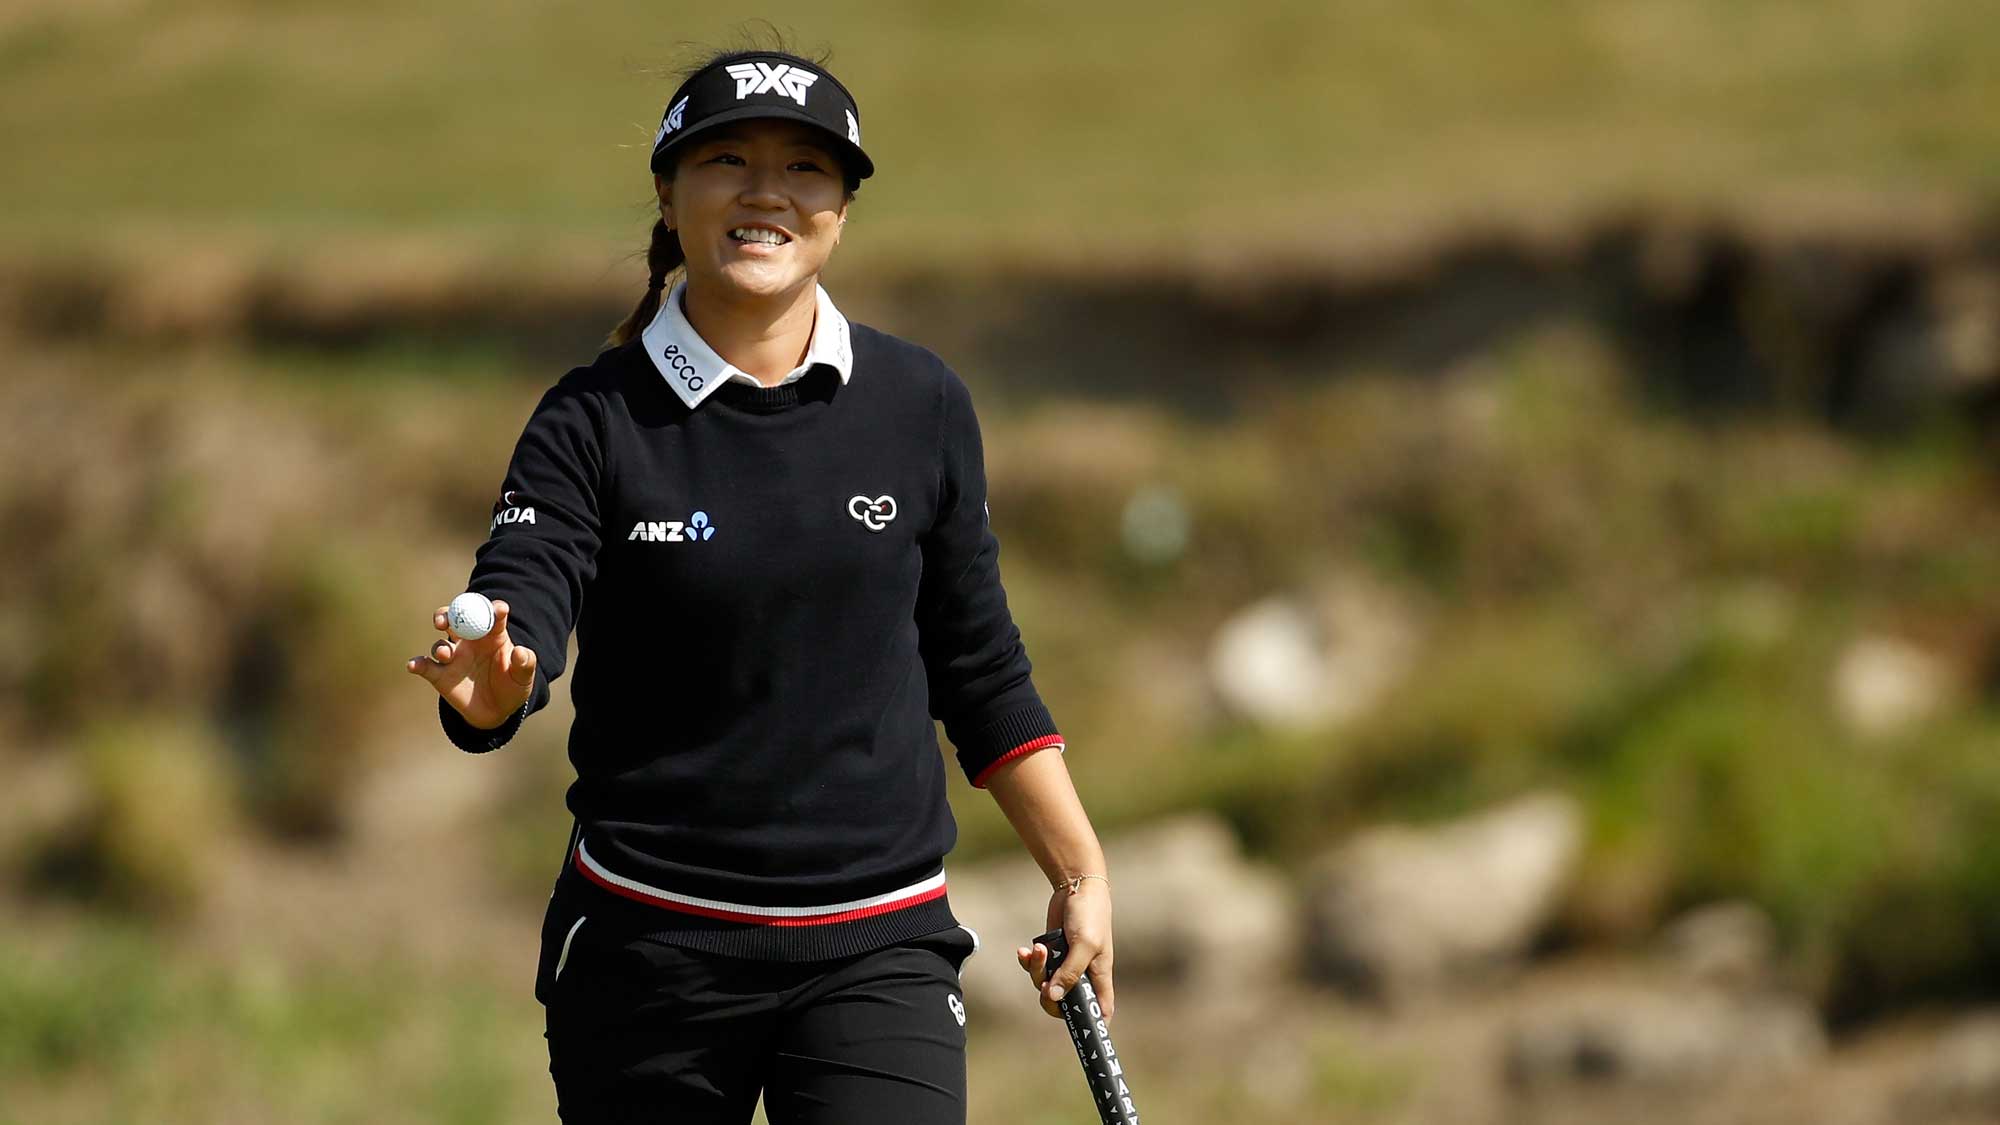 Lydia Ko of New Zealand waves to the crowd after making birdie on the 5th hole during the final round of the Indy Women In Tech Championship-Presented By Guggenheim